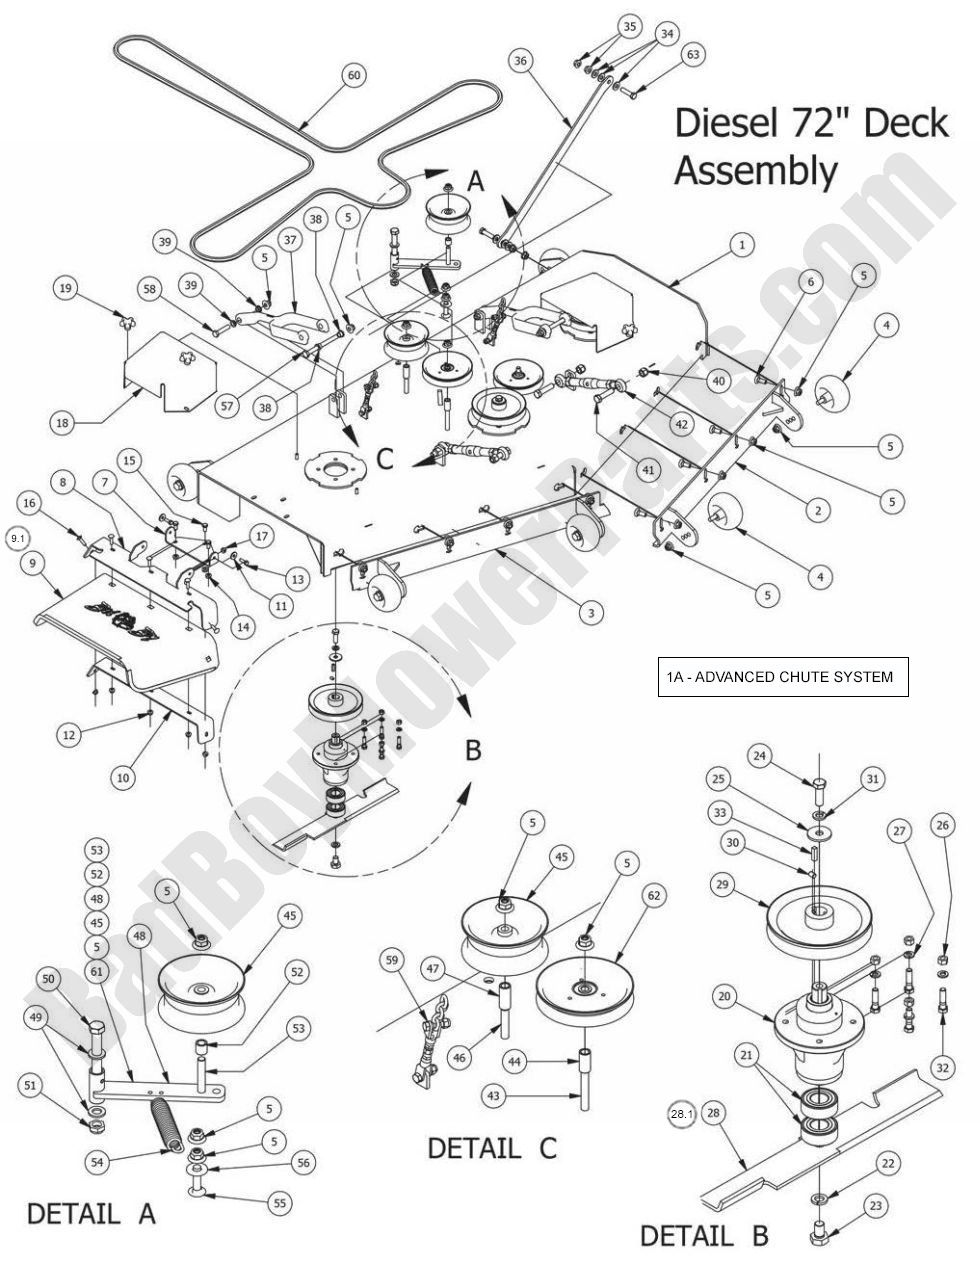 2014 Diesels 72" Deck Assembly